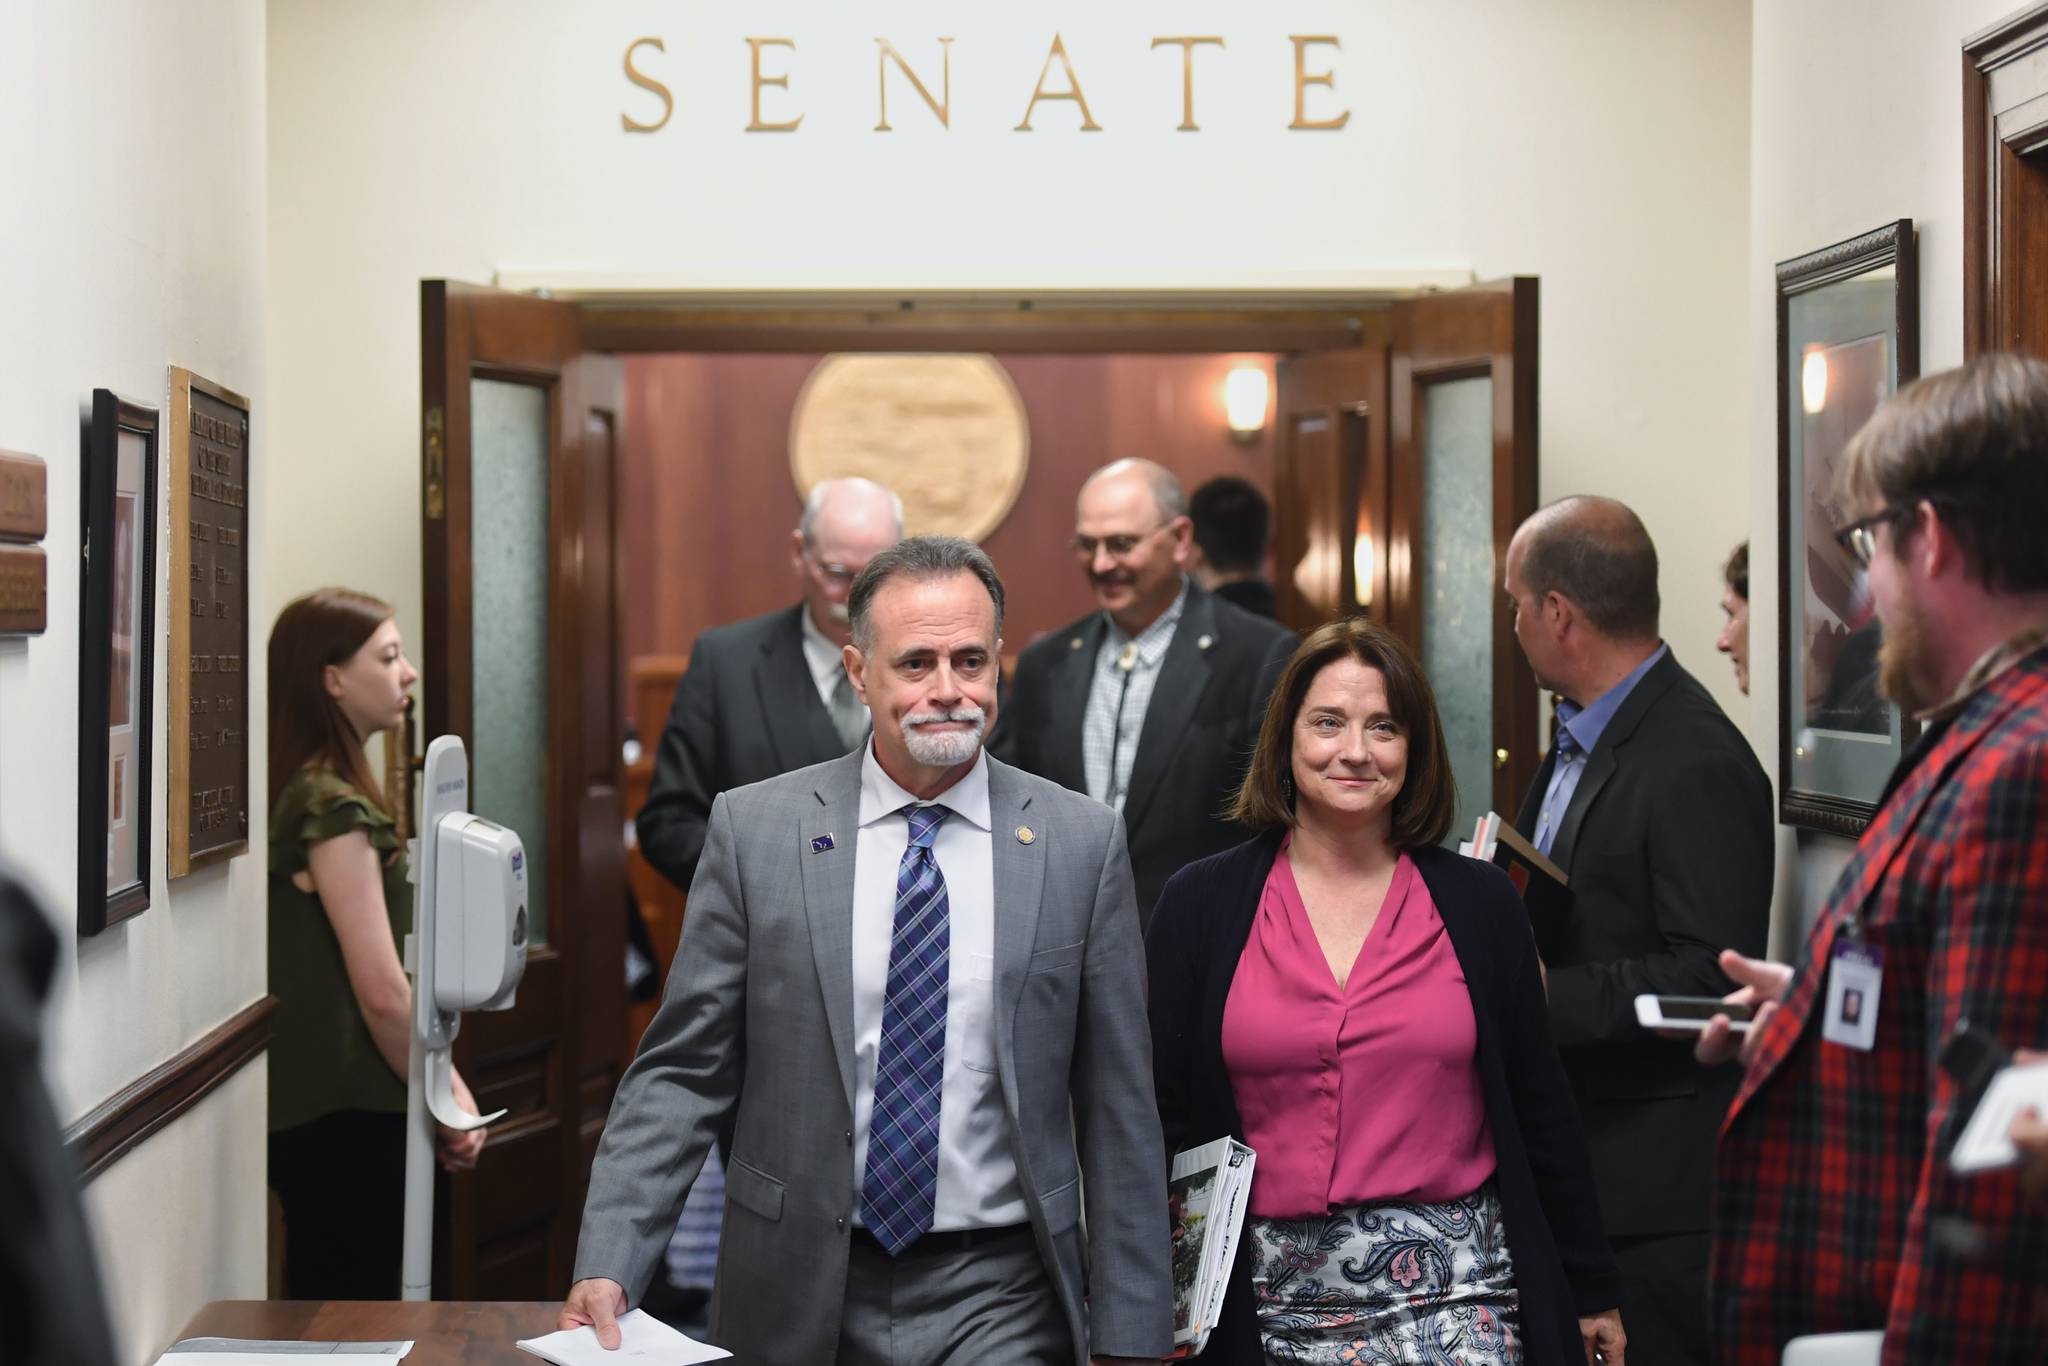 Senators Peter Micciche, R-Soldotna, and Lora Reinbold, R-Eagle River, walk out of the Senate chambers with other senators after a “call” on the Senate was lifted on Thursday, June 6, 2019. (Michael Penn | Juneau Empire)